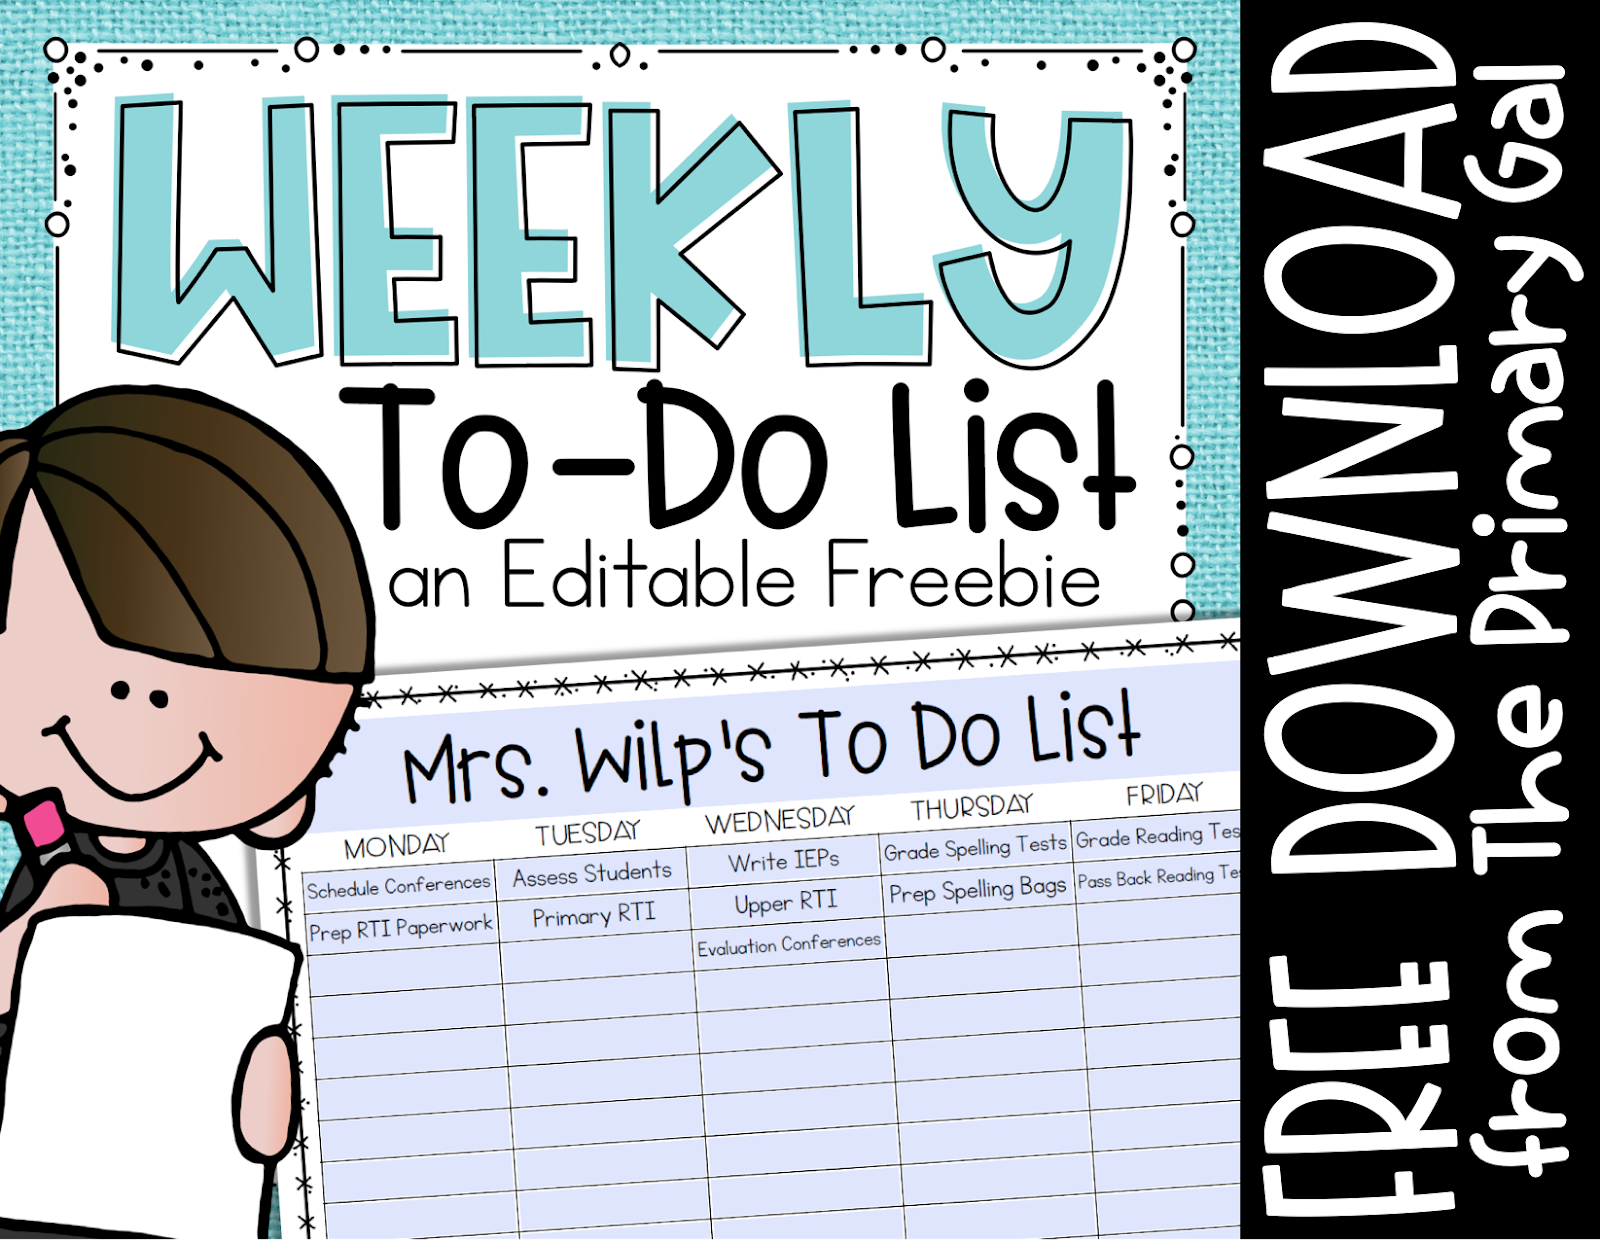 Utilizing this FREE weekly to do list helps keep home and school life on track. Keep your mind at ease knowing that you're on track for your goals.Organizing made simple for the teacher with a full plate that needs an editable template to stay on course. {teacher, freebie, printable}